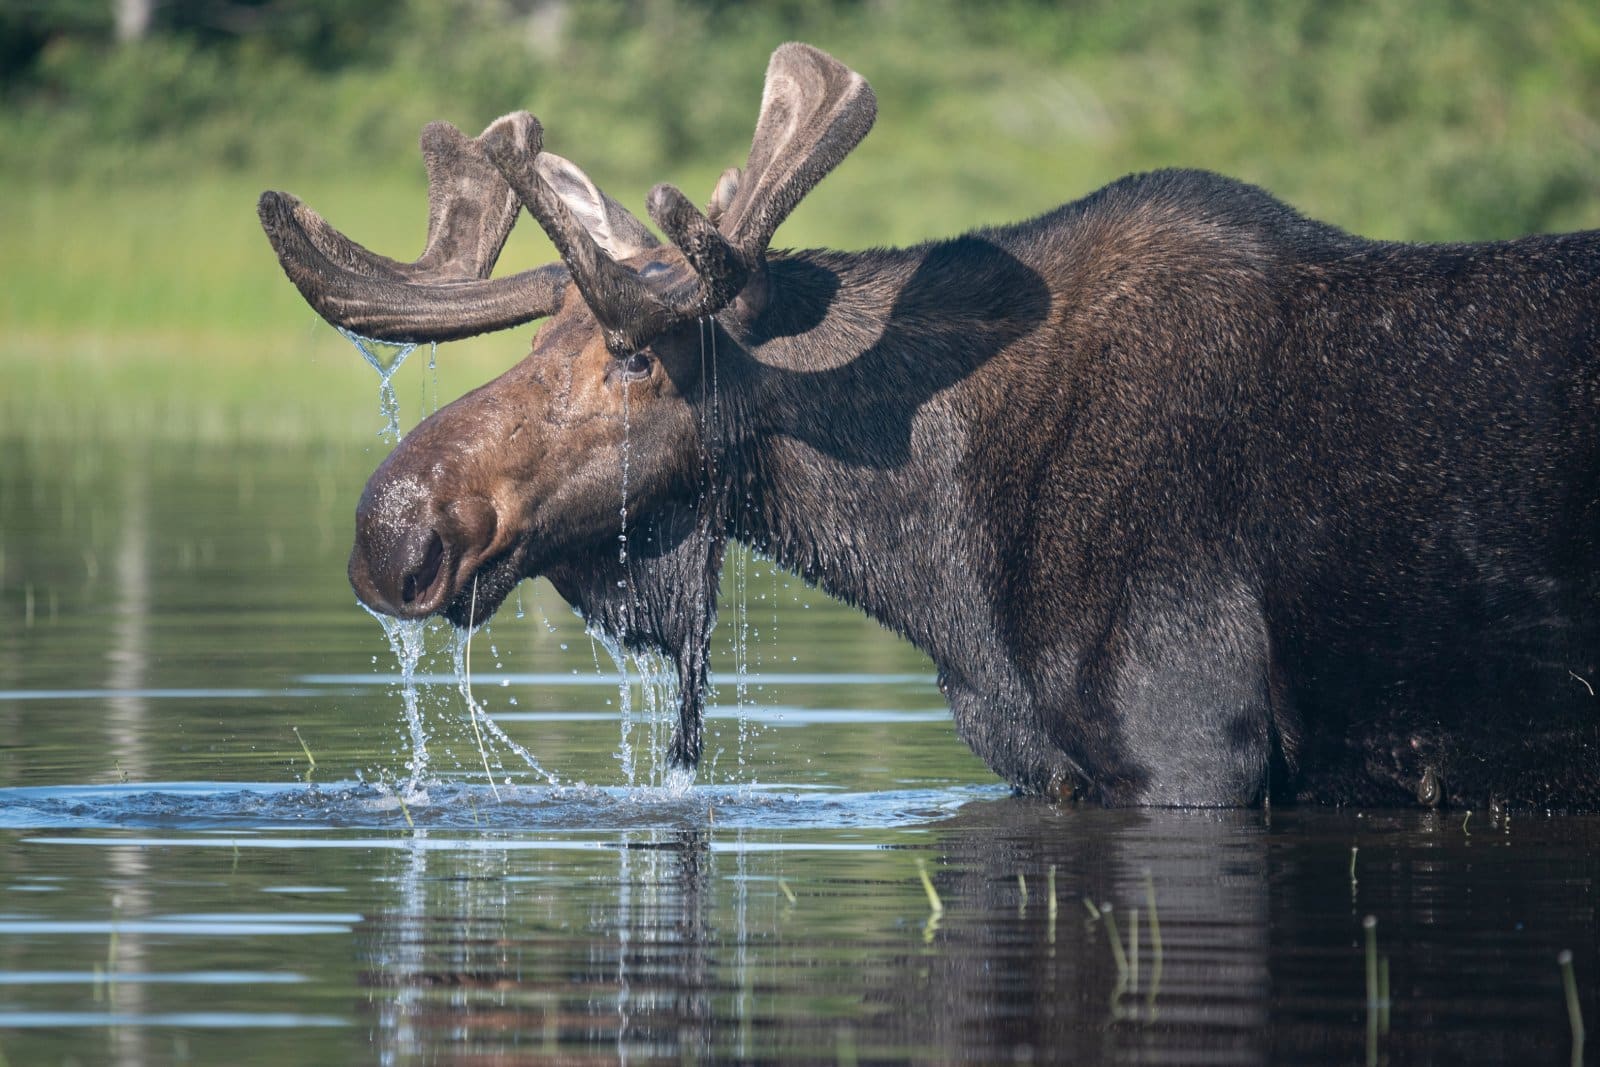 <p class="wp-caption-text">Image Credit: Shutterstock / Jeffrey M Levine</p>  <p>Discover the majesty of Moosehead Lake by boat, foot, or from the comfort of a lakeside cabin. It’s a nature lover’s dream, offering serene beauty and the chance to spot Maine’s iconic moose in the wild.</p>